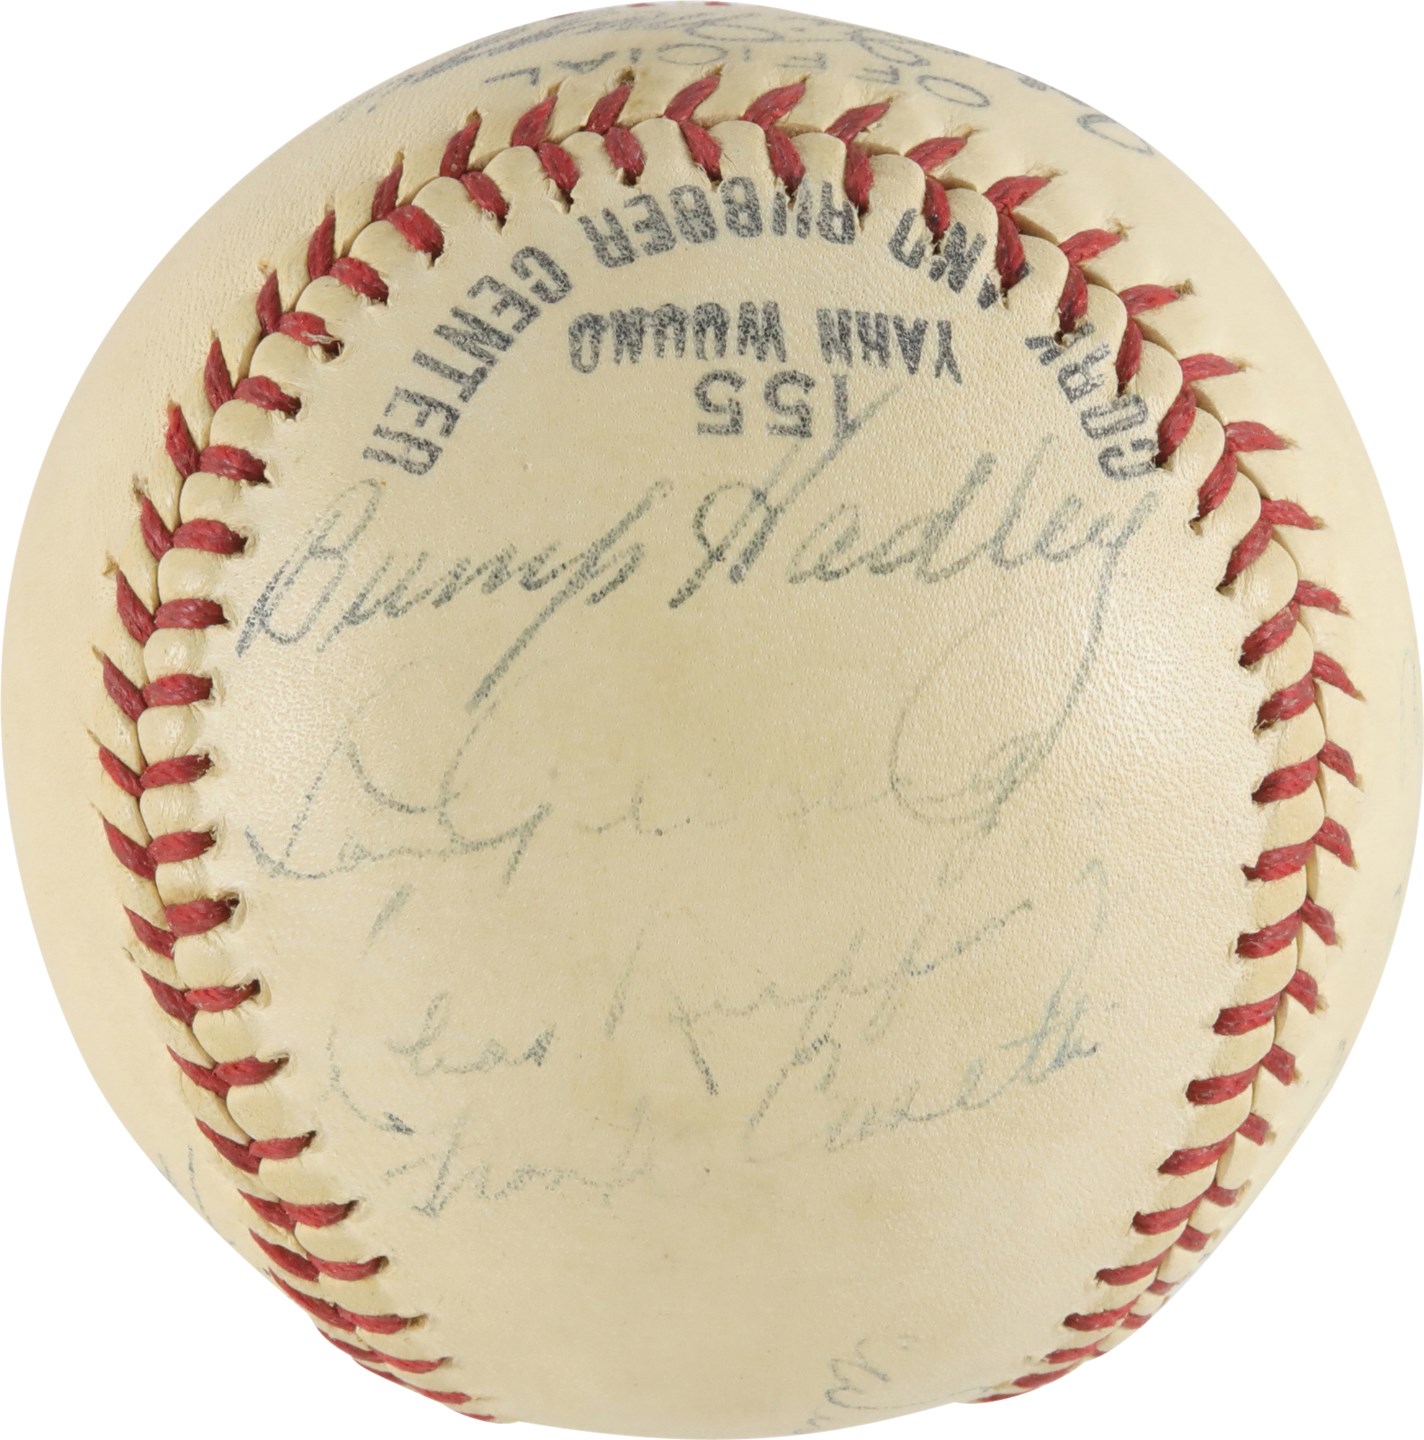 - 1939 New York Yankees World Champions Team-Signed Baseball with Gehrig (PSA)